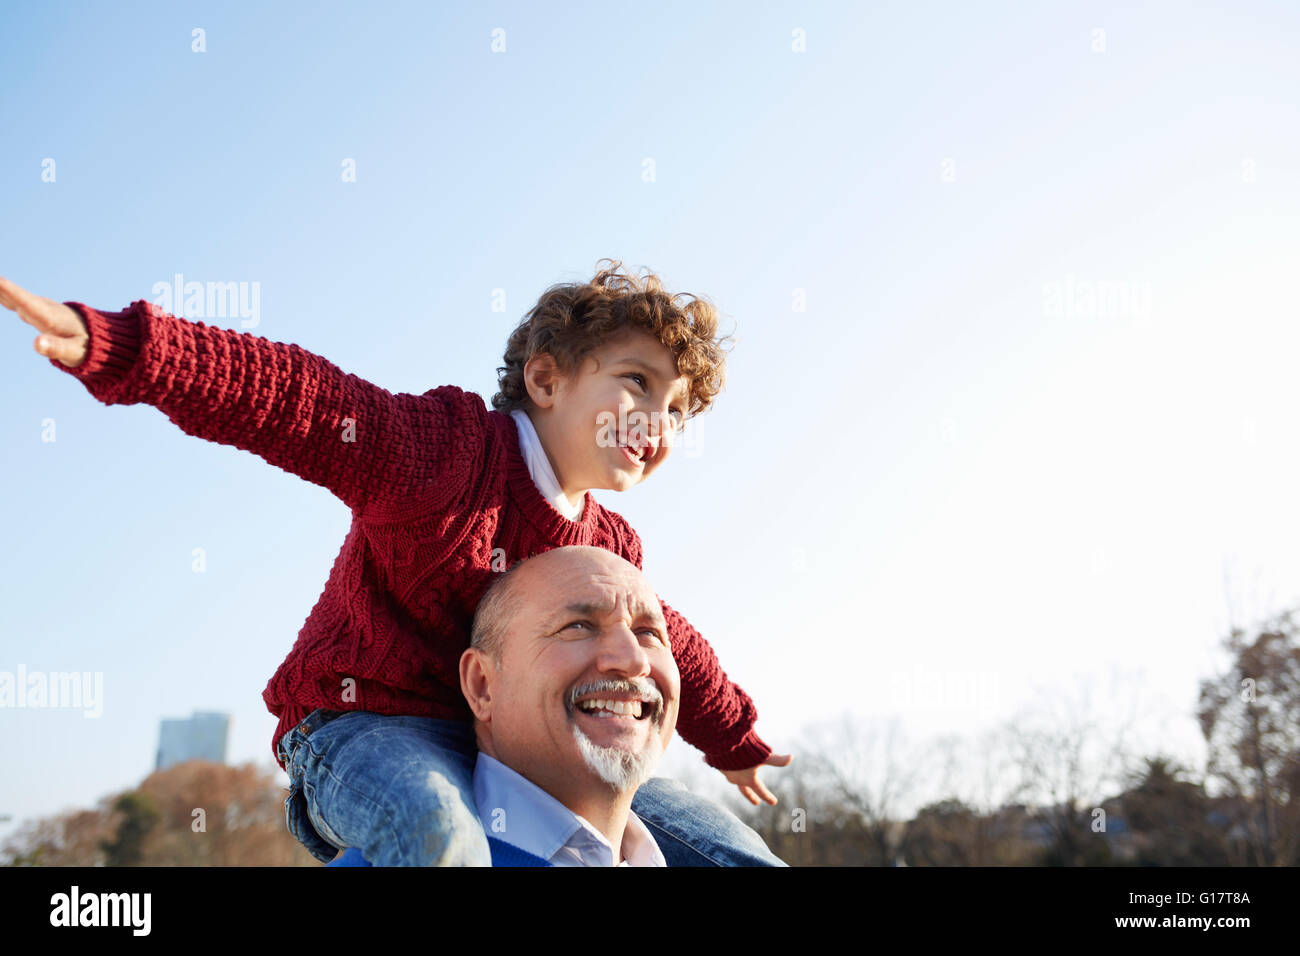 Grandson sitting on grandfathers shoulders, arms out smiling Stock Photo